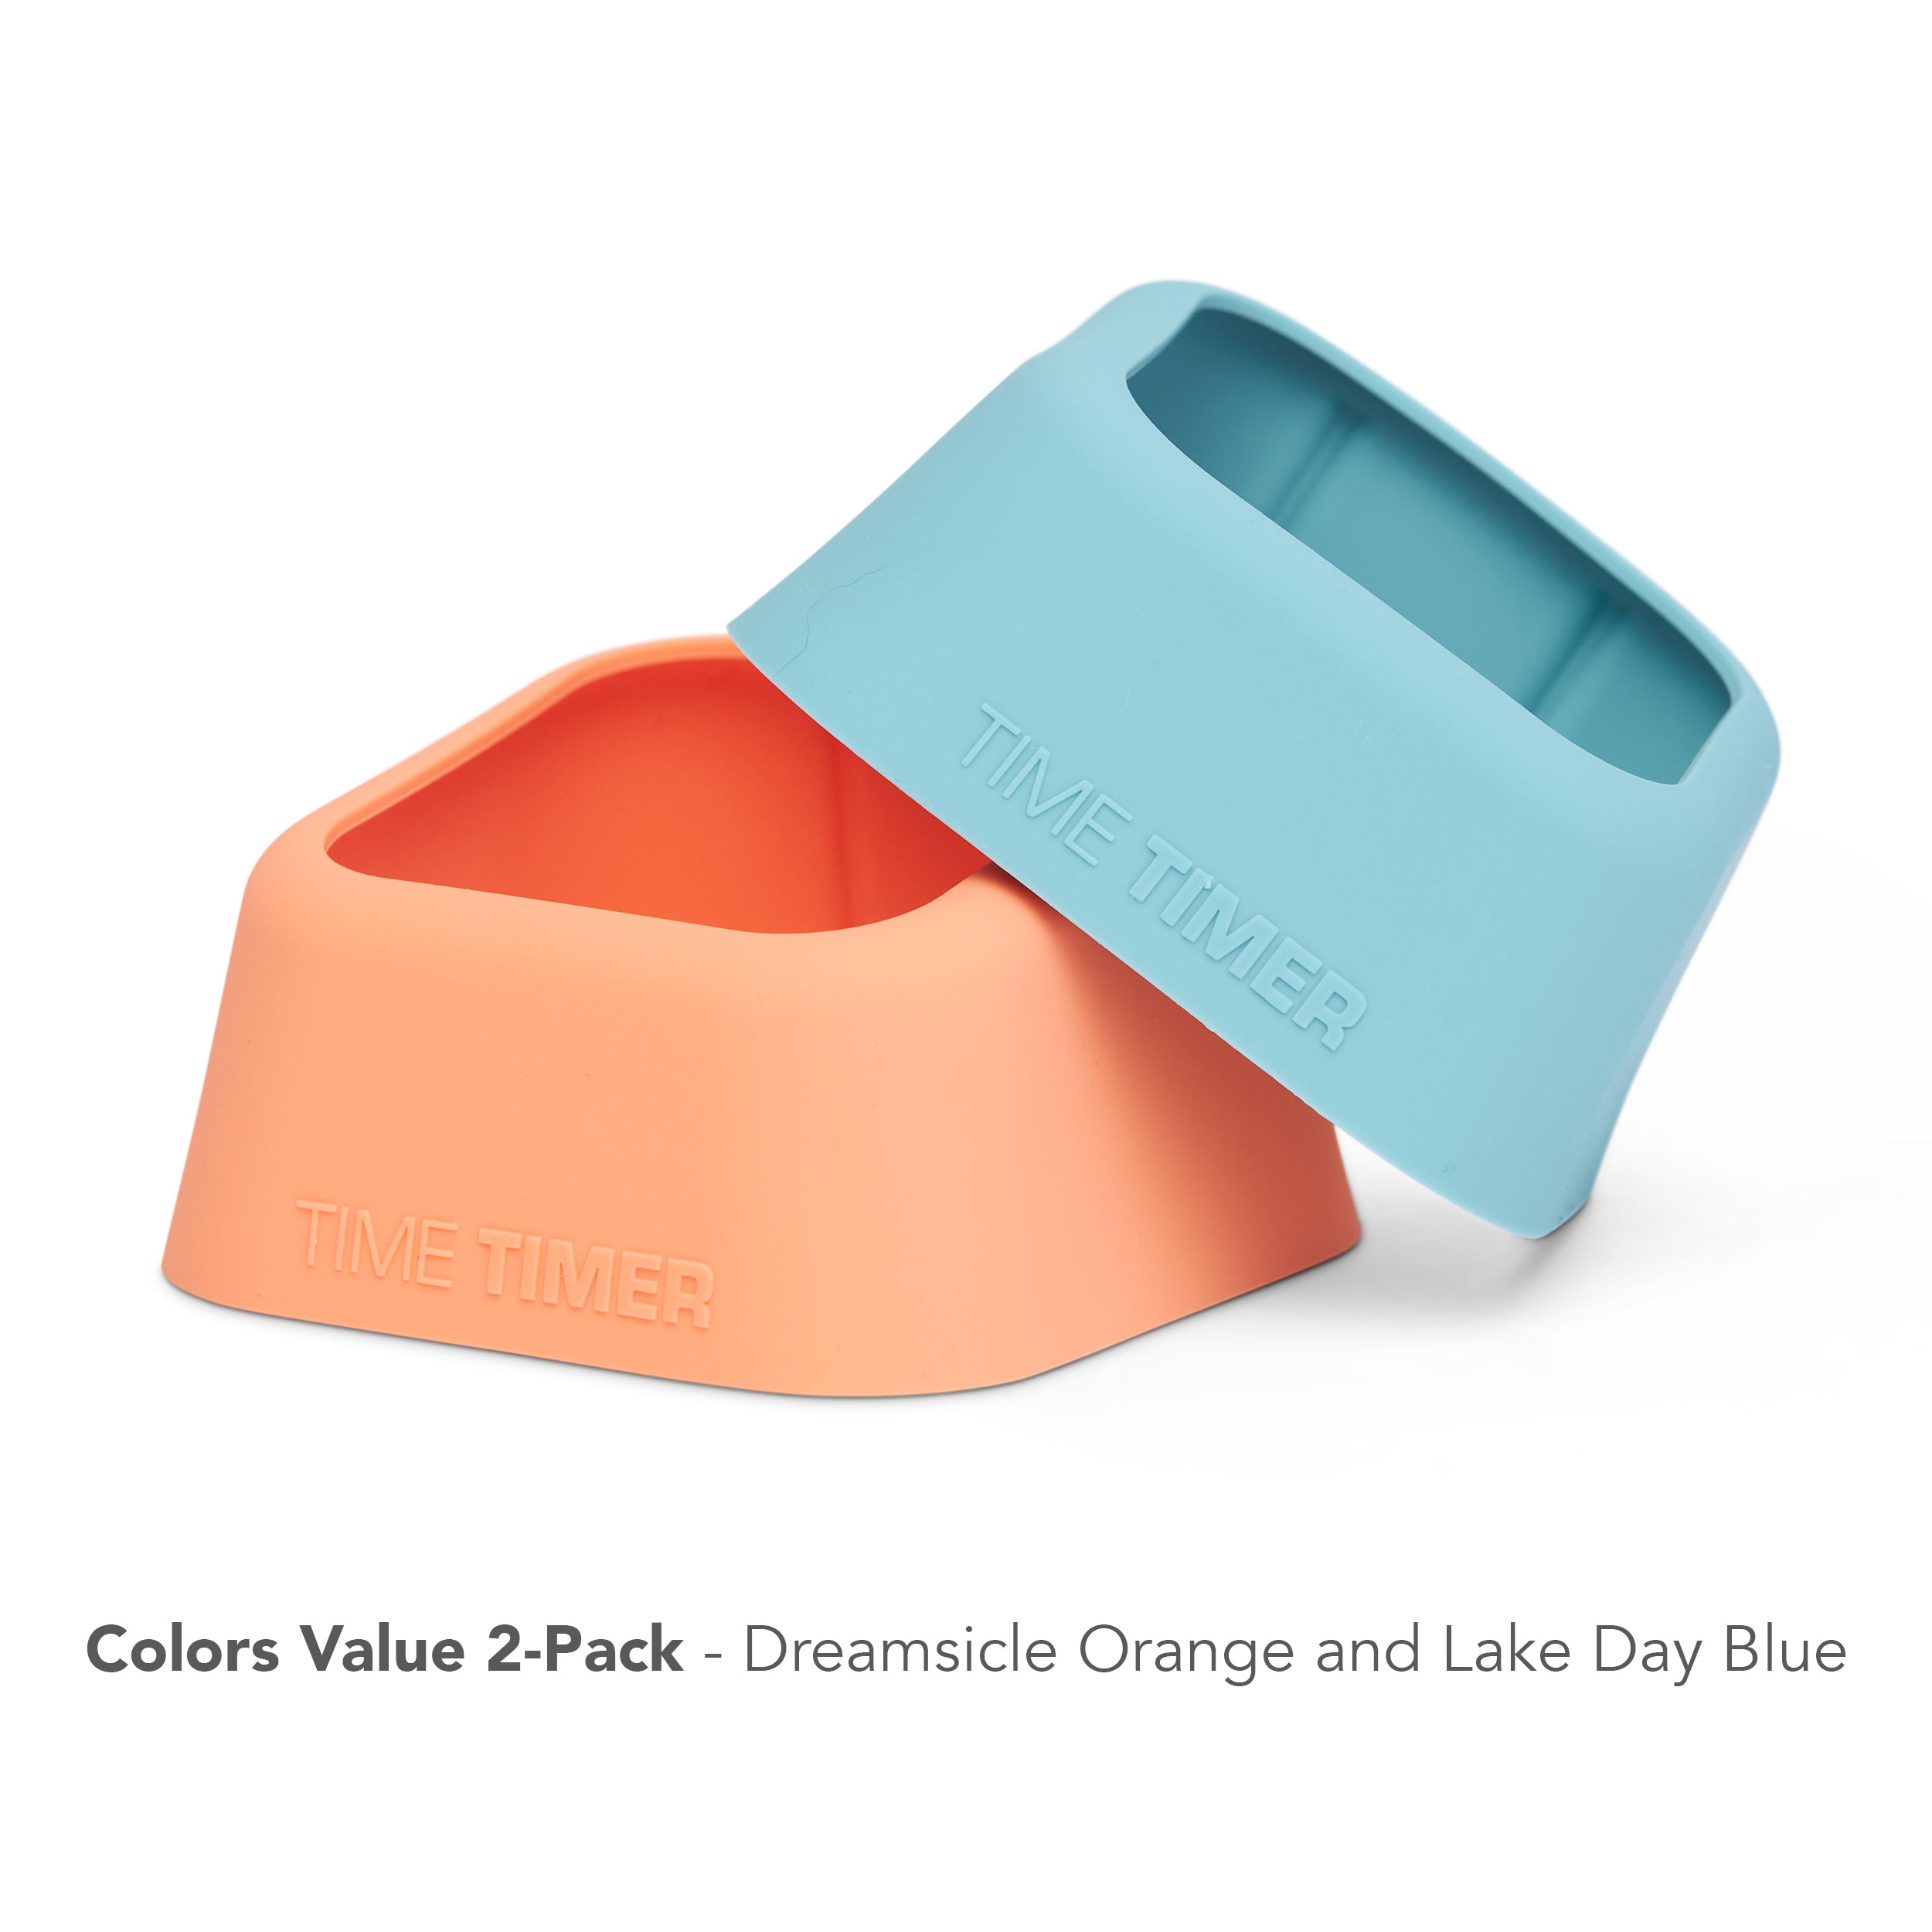 Time Timer MOD Home Edition Accessory - Colors value 2-pack dreamsicle orange and lake day blue